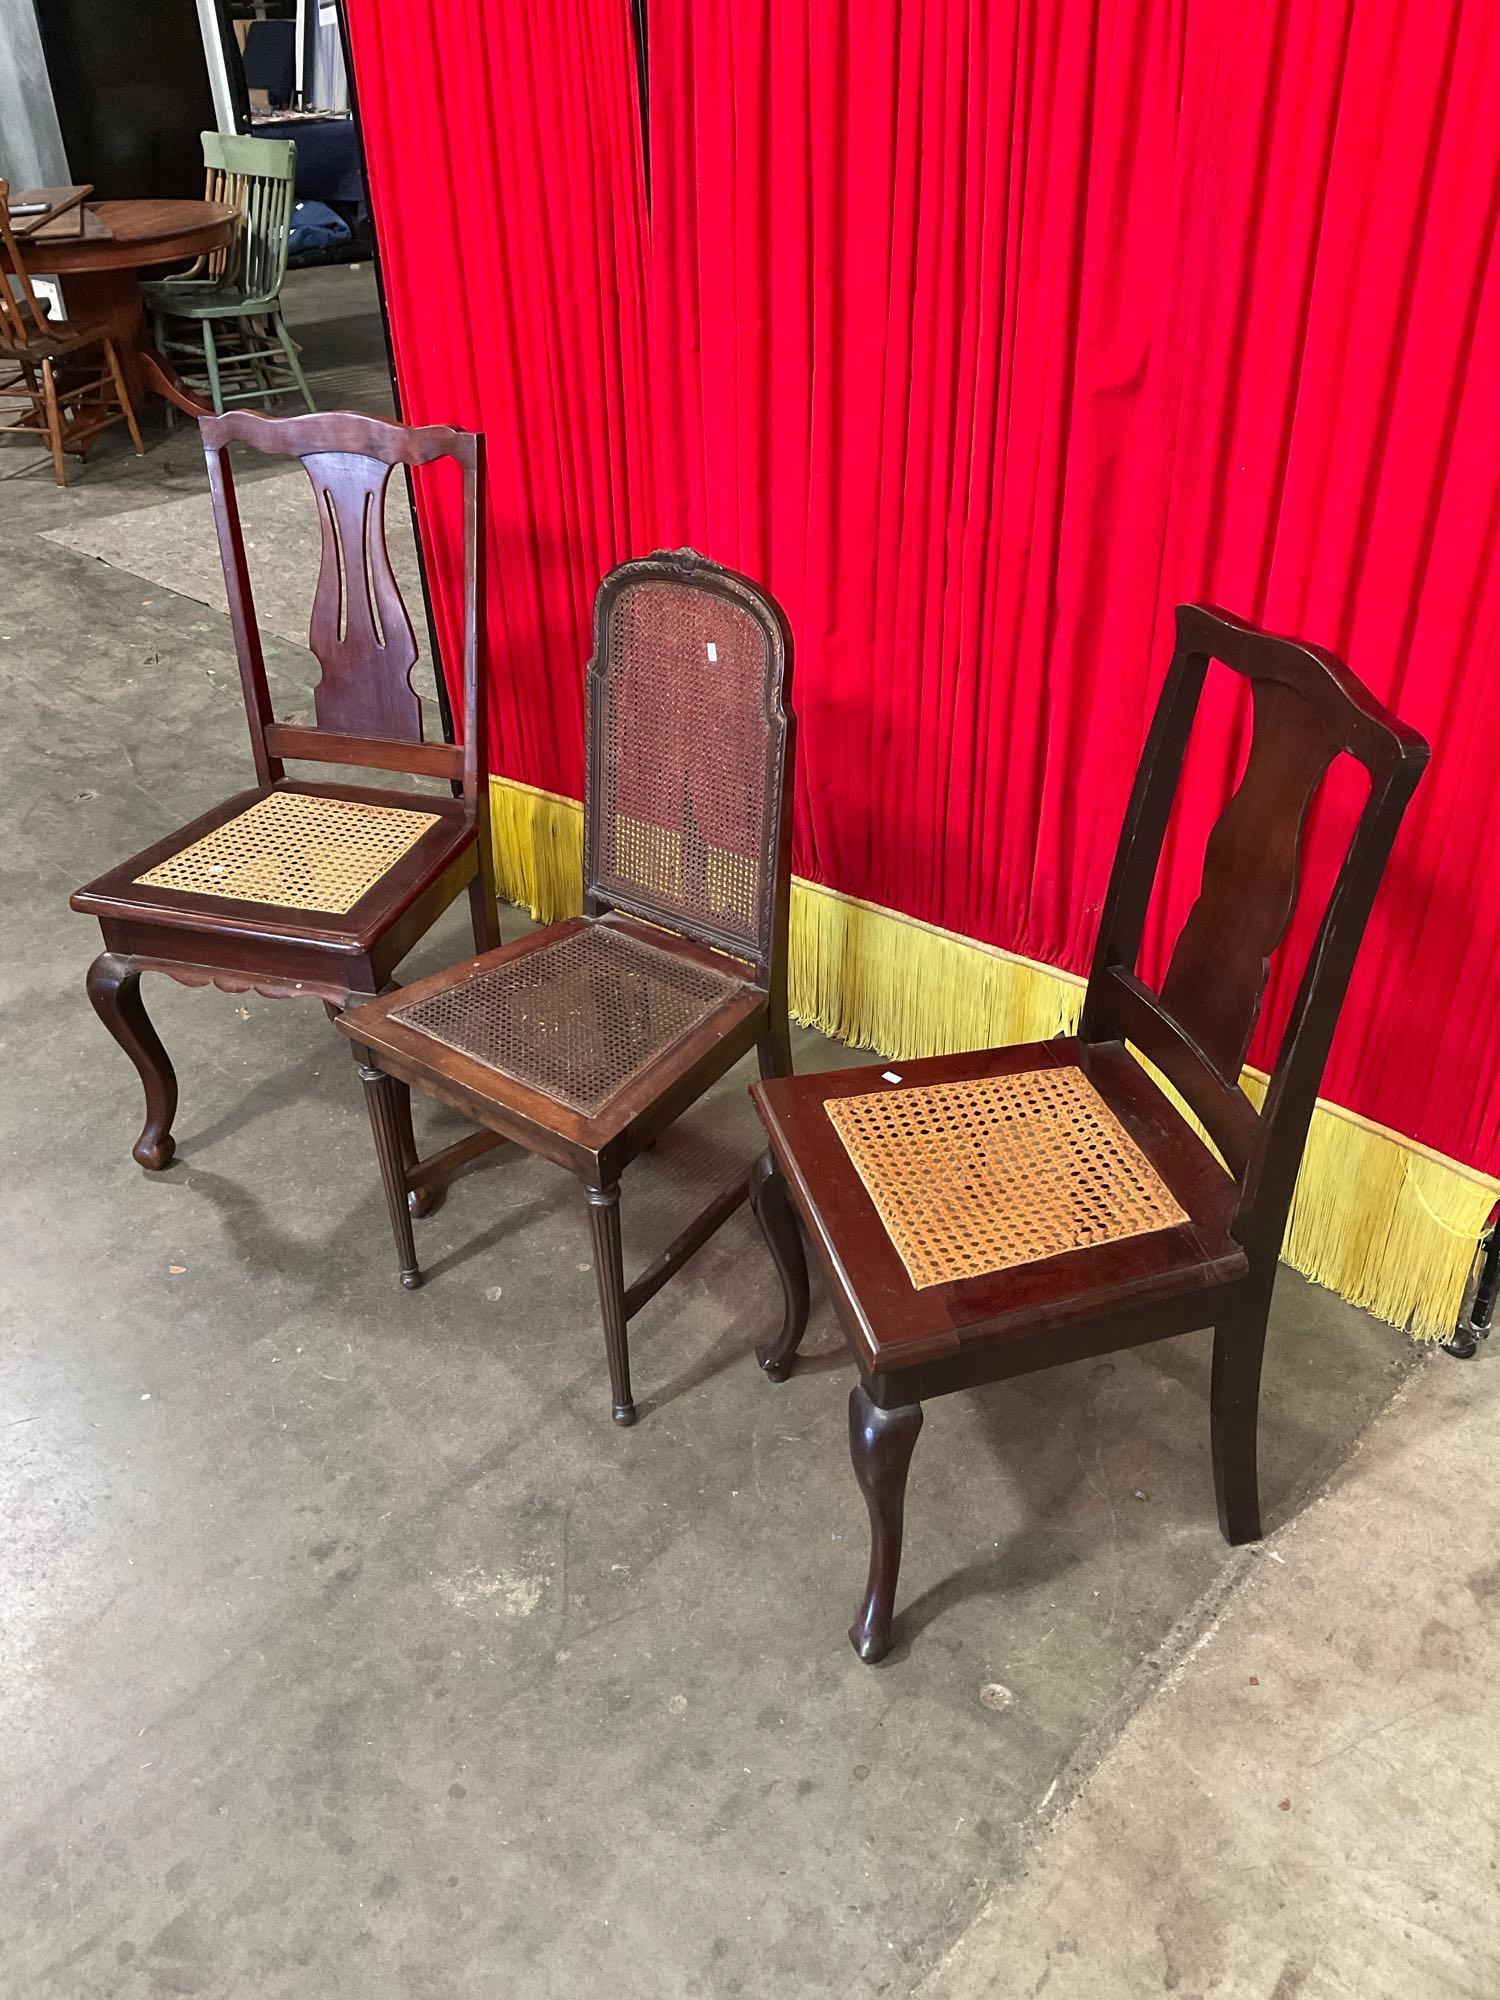 3 pcs Antique Wooden Buffet Chairs Assortment. 1 Urn Back, 1 Caned Back, 1 Lyre Back. See pics.